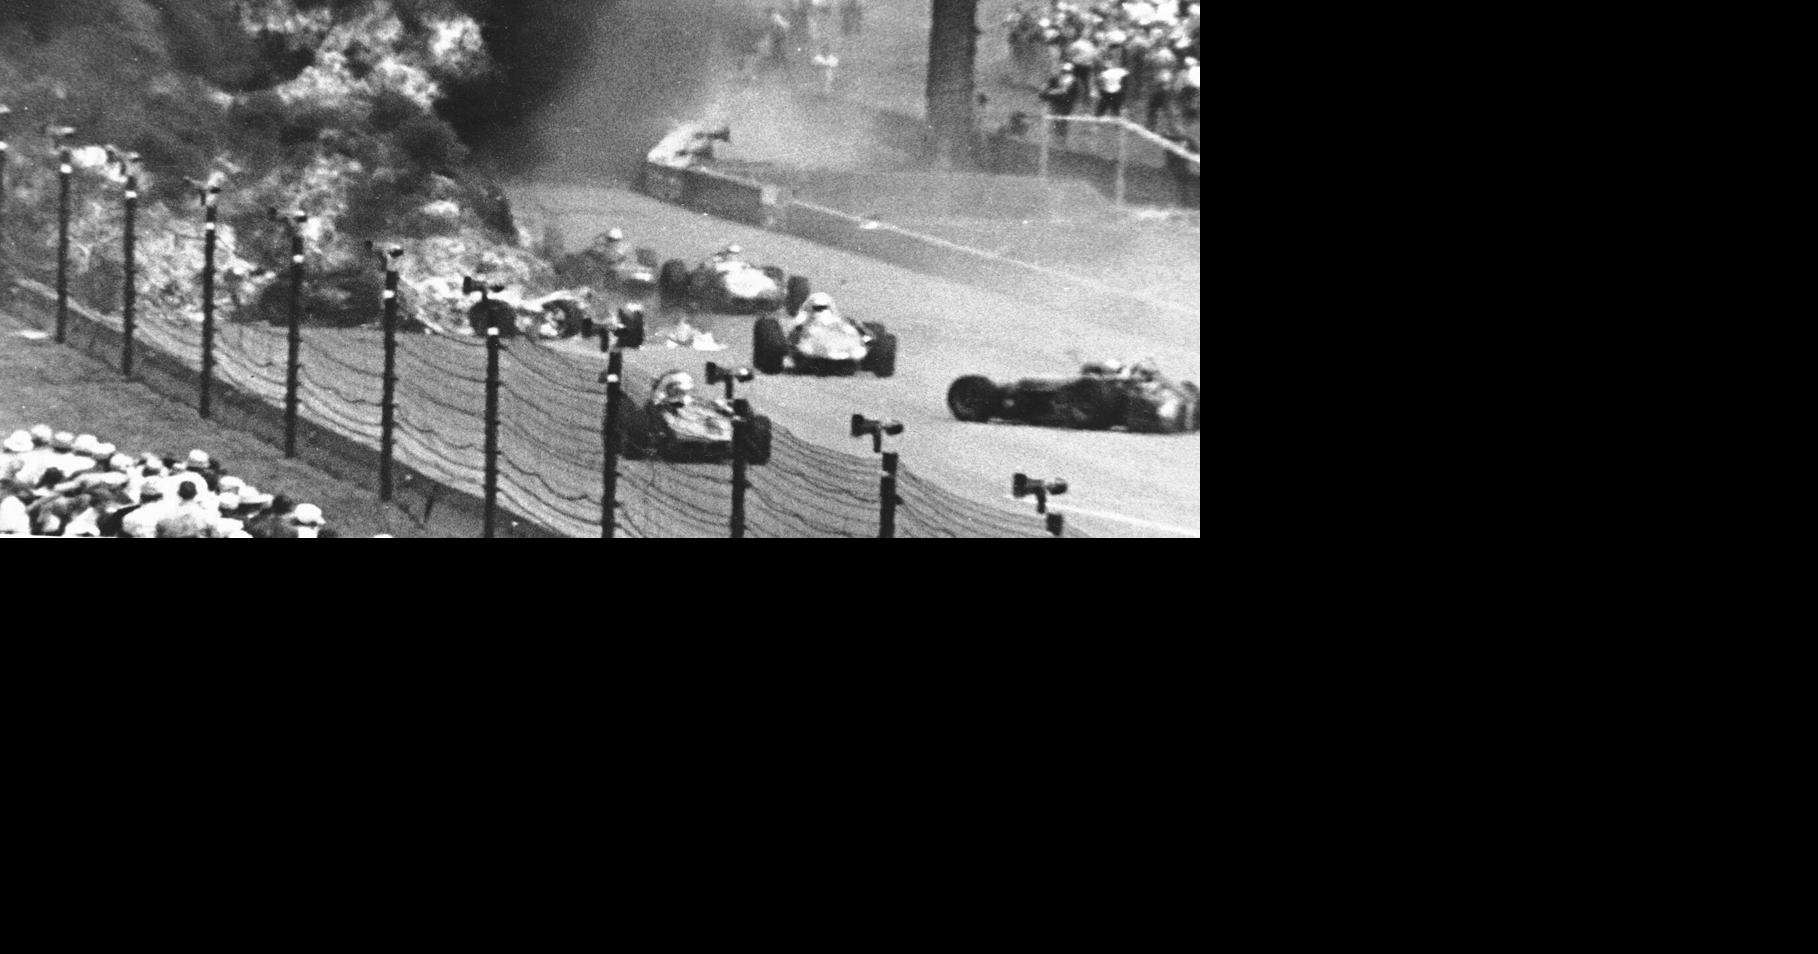 Deaths and tragedy from 1973 Indy 500 led to safety evolution